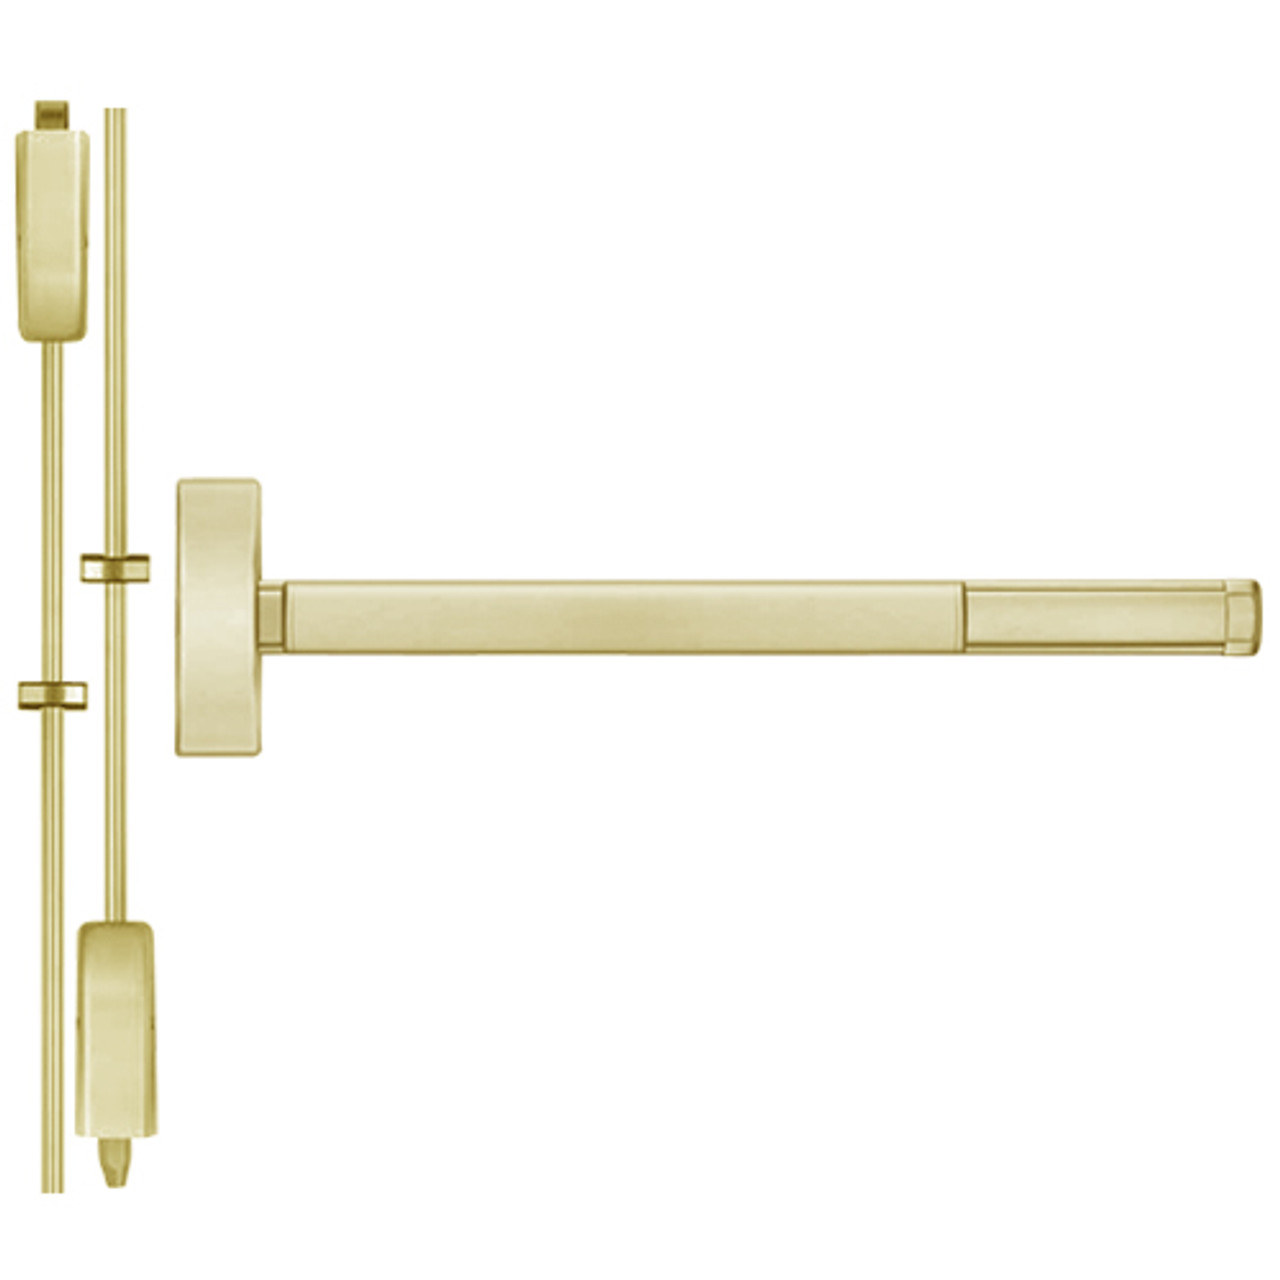 TS2205-606-36 PHI 2200 Series Non Fire Rated Apex Surface Vertical Rod Device with Touchbar Monitoring Switch Prepped for Key Controls Thumb Piece in Satin Brass Finish